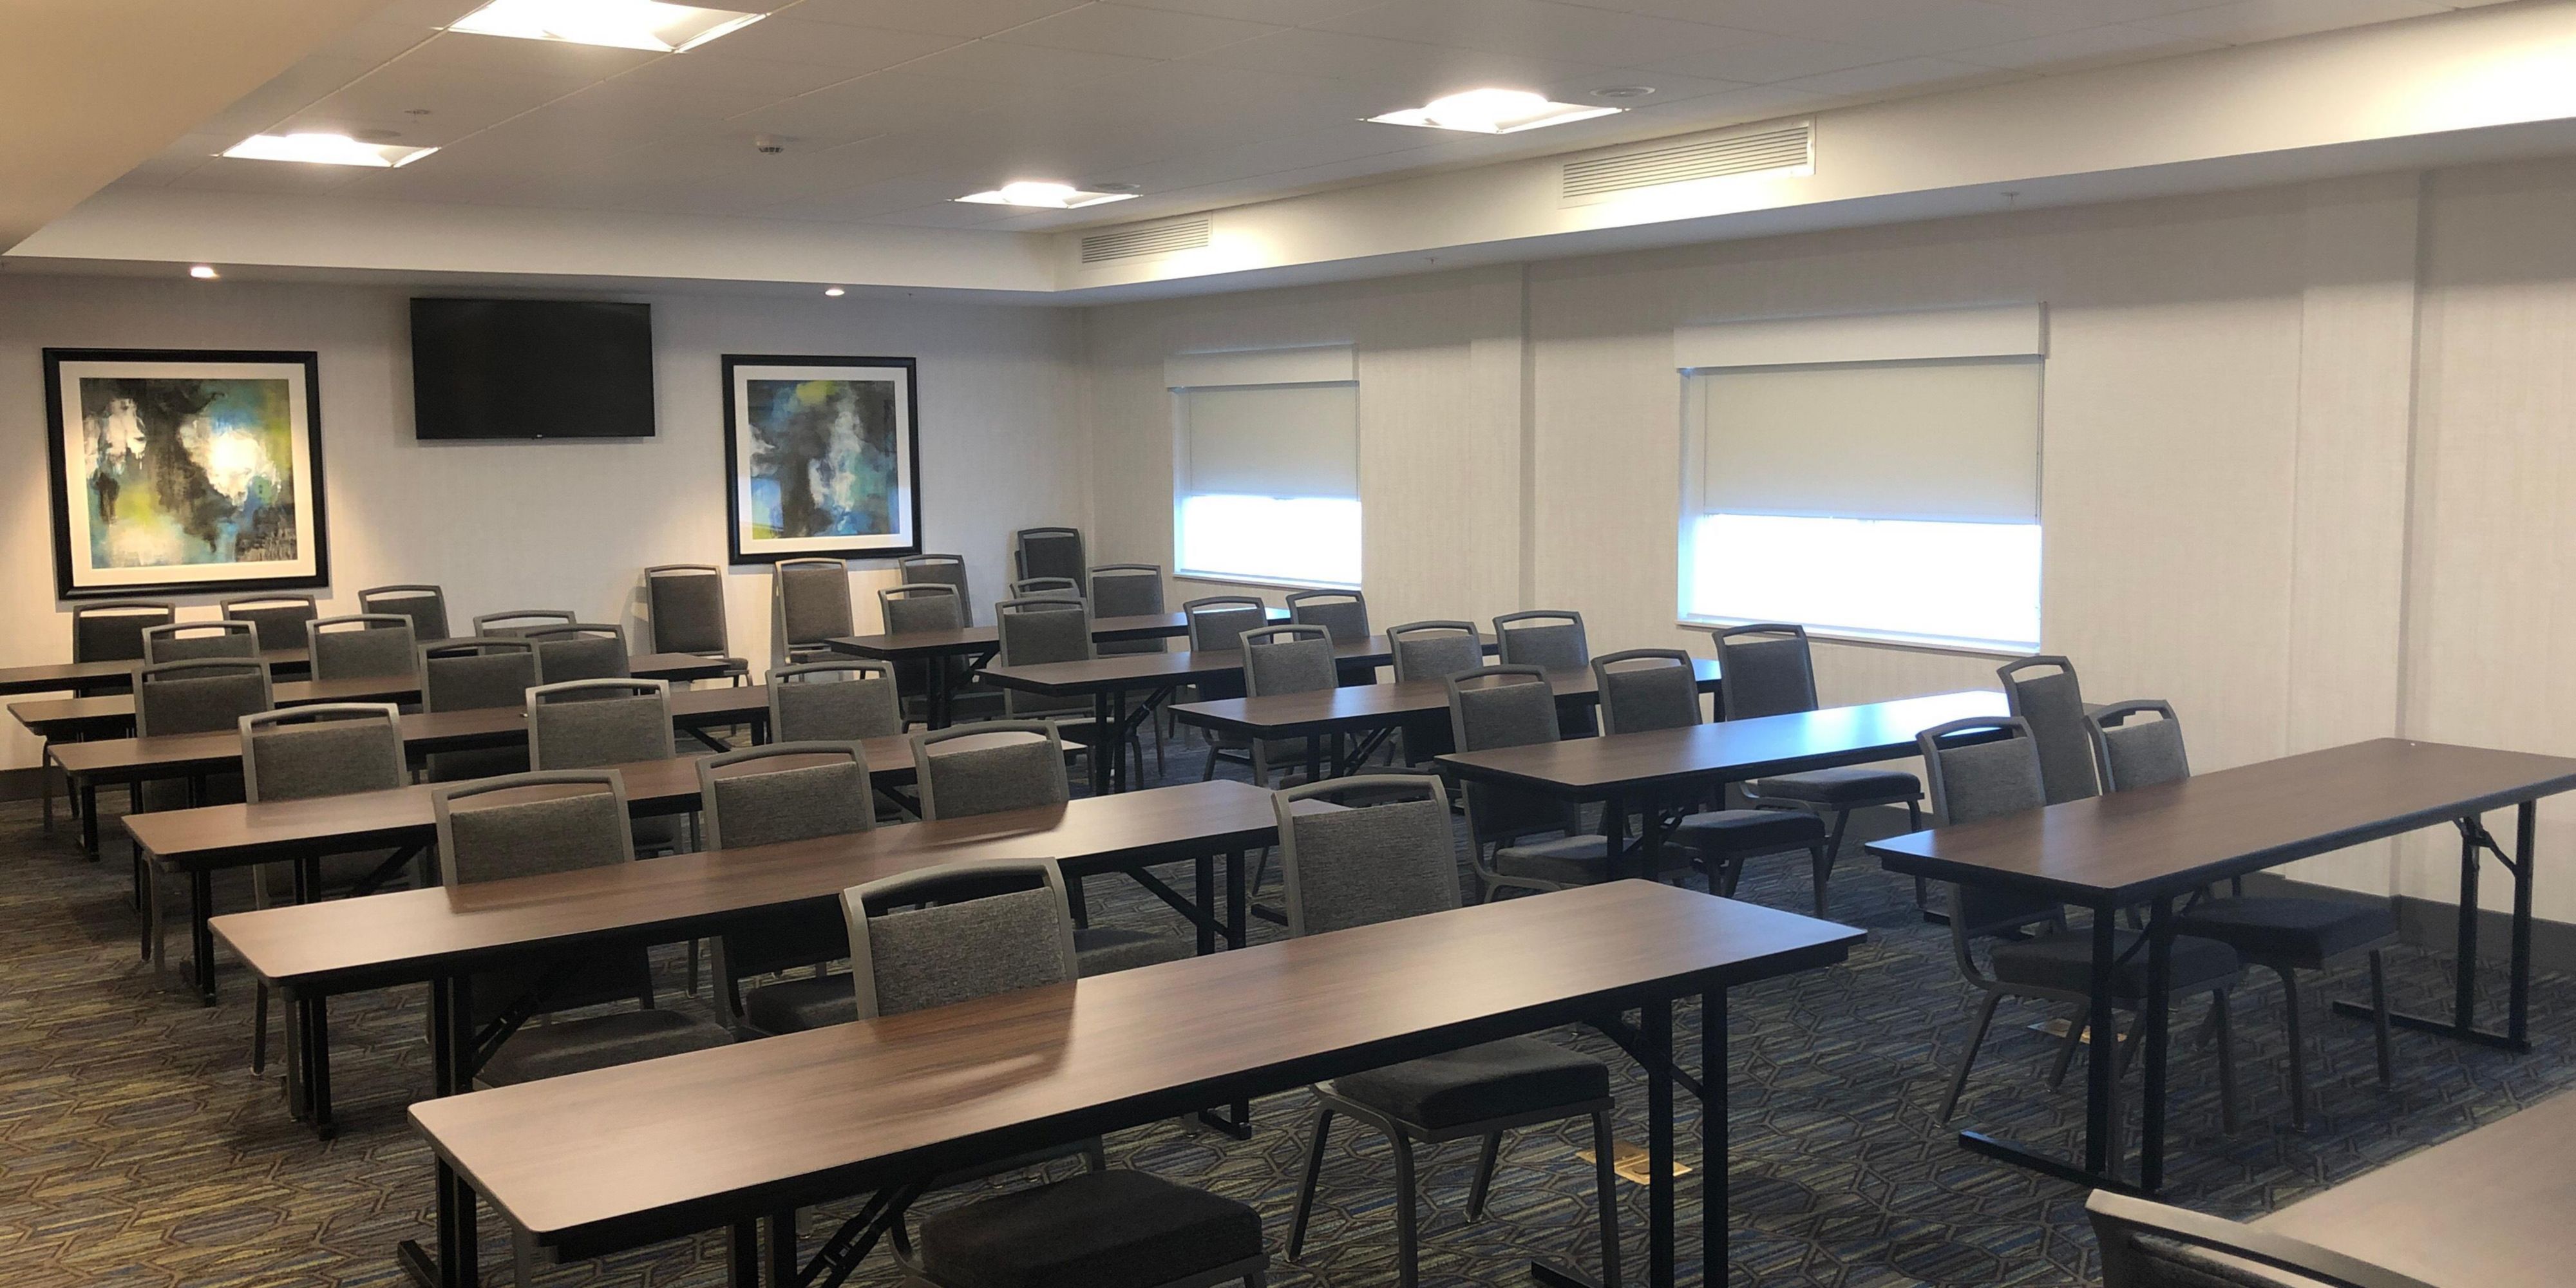 Two corporate meeting rooms are available on site for rental.
Conference room for 14 attendees boardroom style.
Salon set for 35 people classroom.